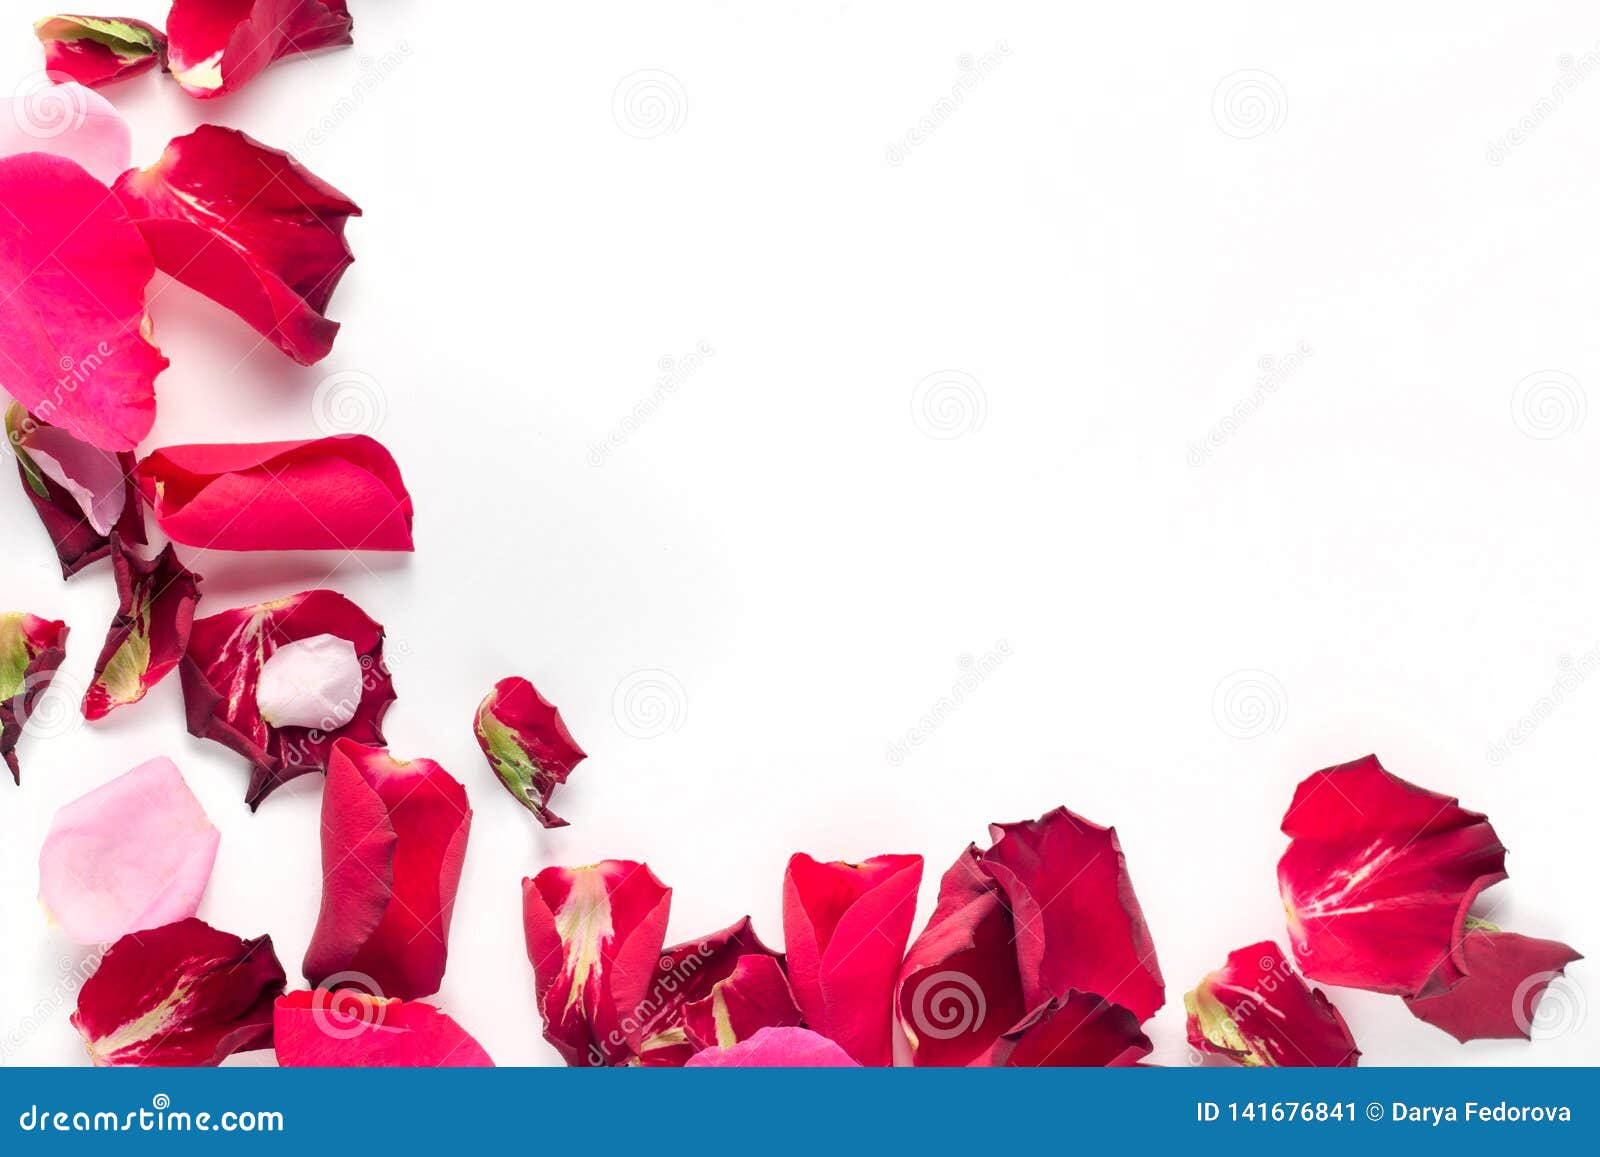 Rose Flowers Petals on White Background. Valentines Day Background. Flat  Lay, Top View, Copy Space Stock Image - Image of holiday, leaf: 141676841